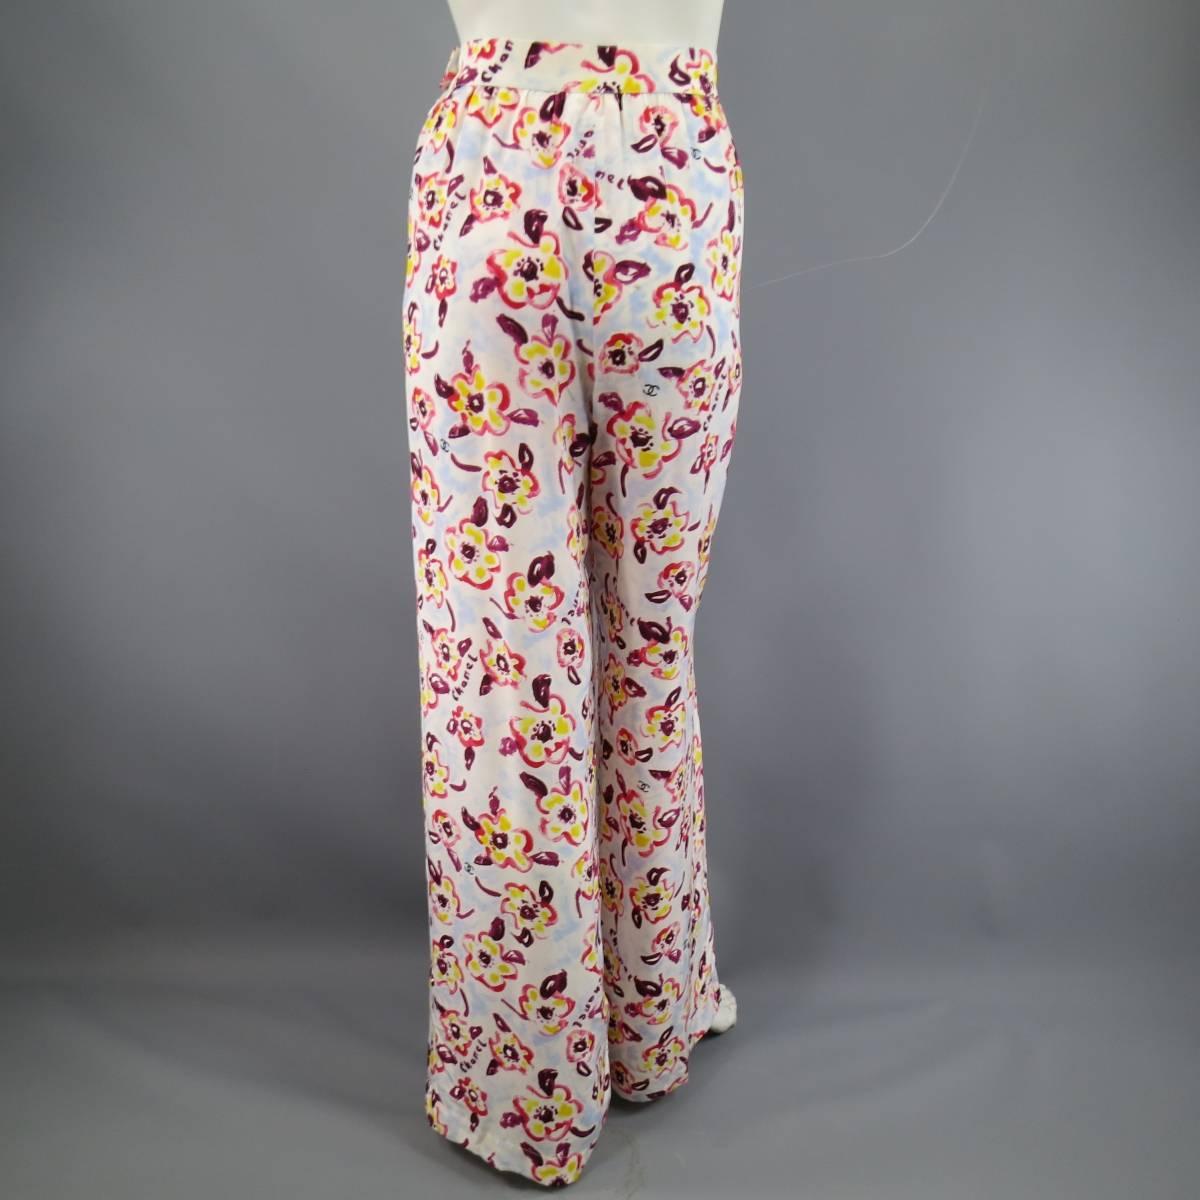 1996 CHANEL Size 8 Light Blue Pink & Yellow Watercolor Floral Wide Leg Pants 1